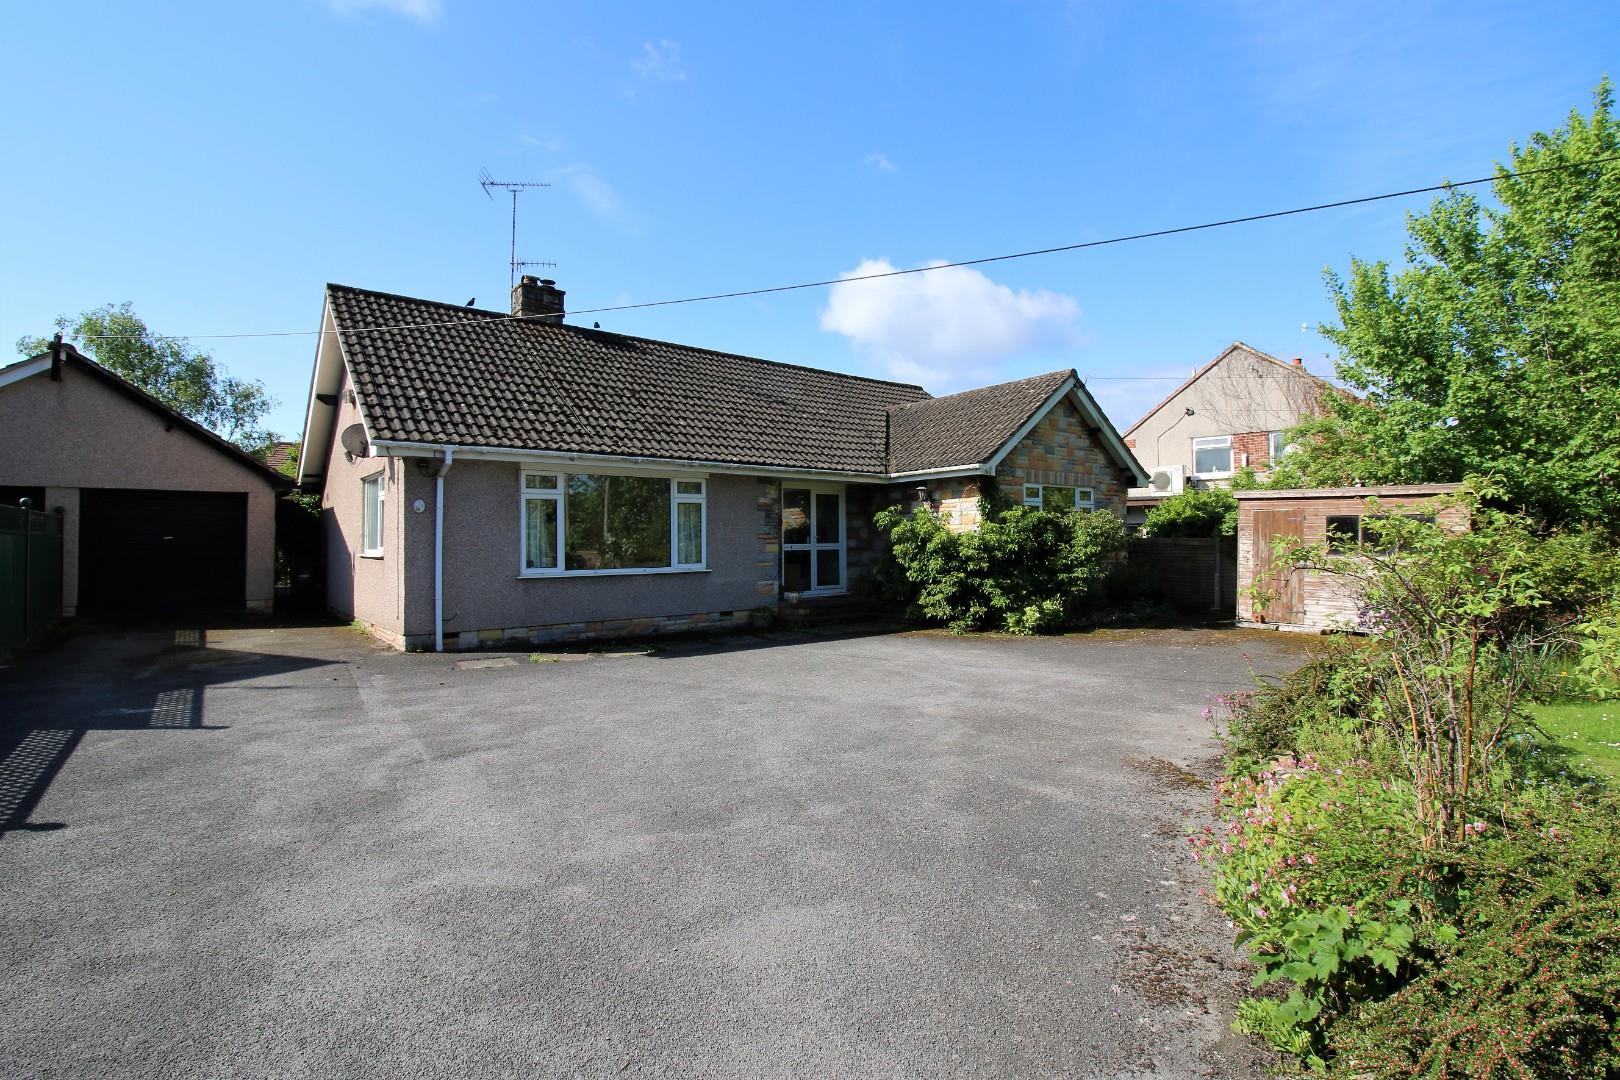 Substantial, detached bungalow in the rural village of Winscombe